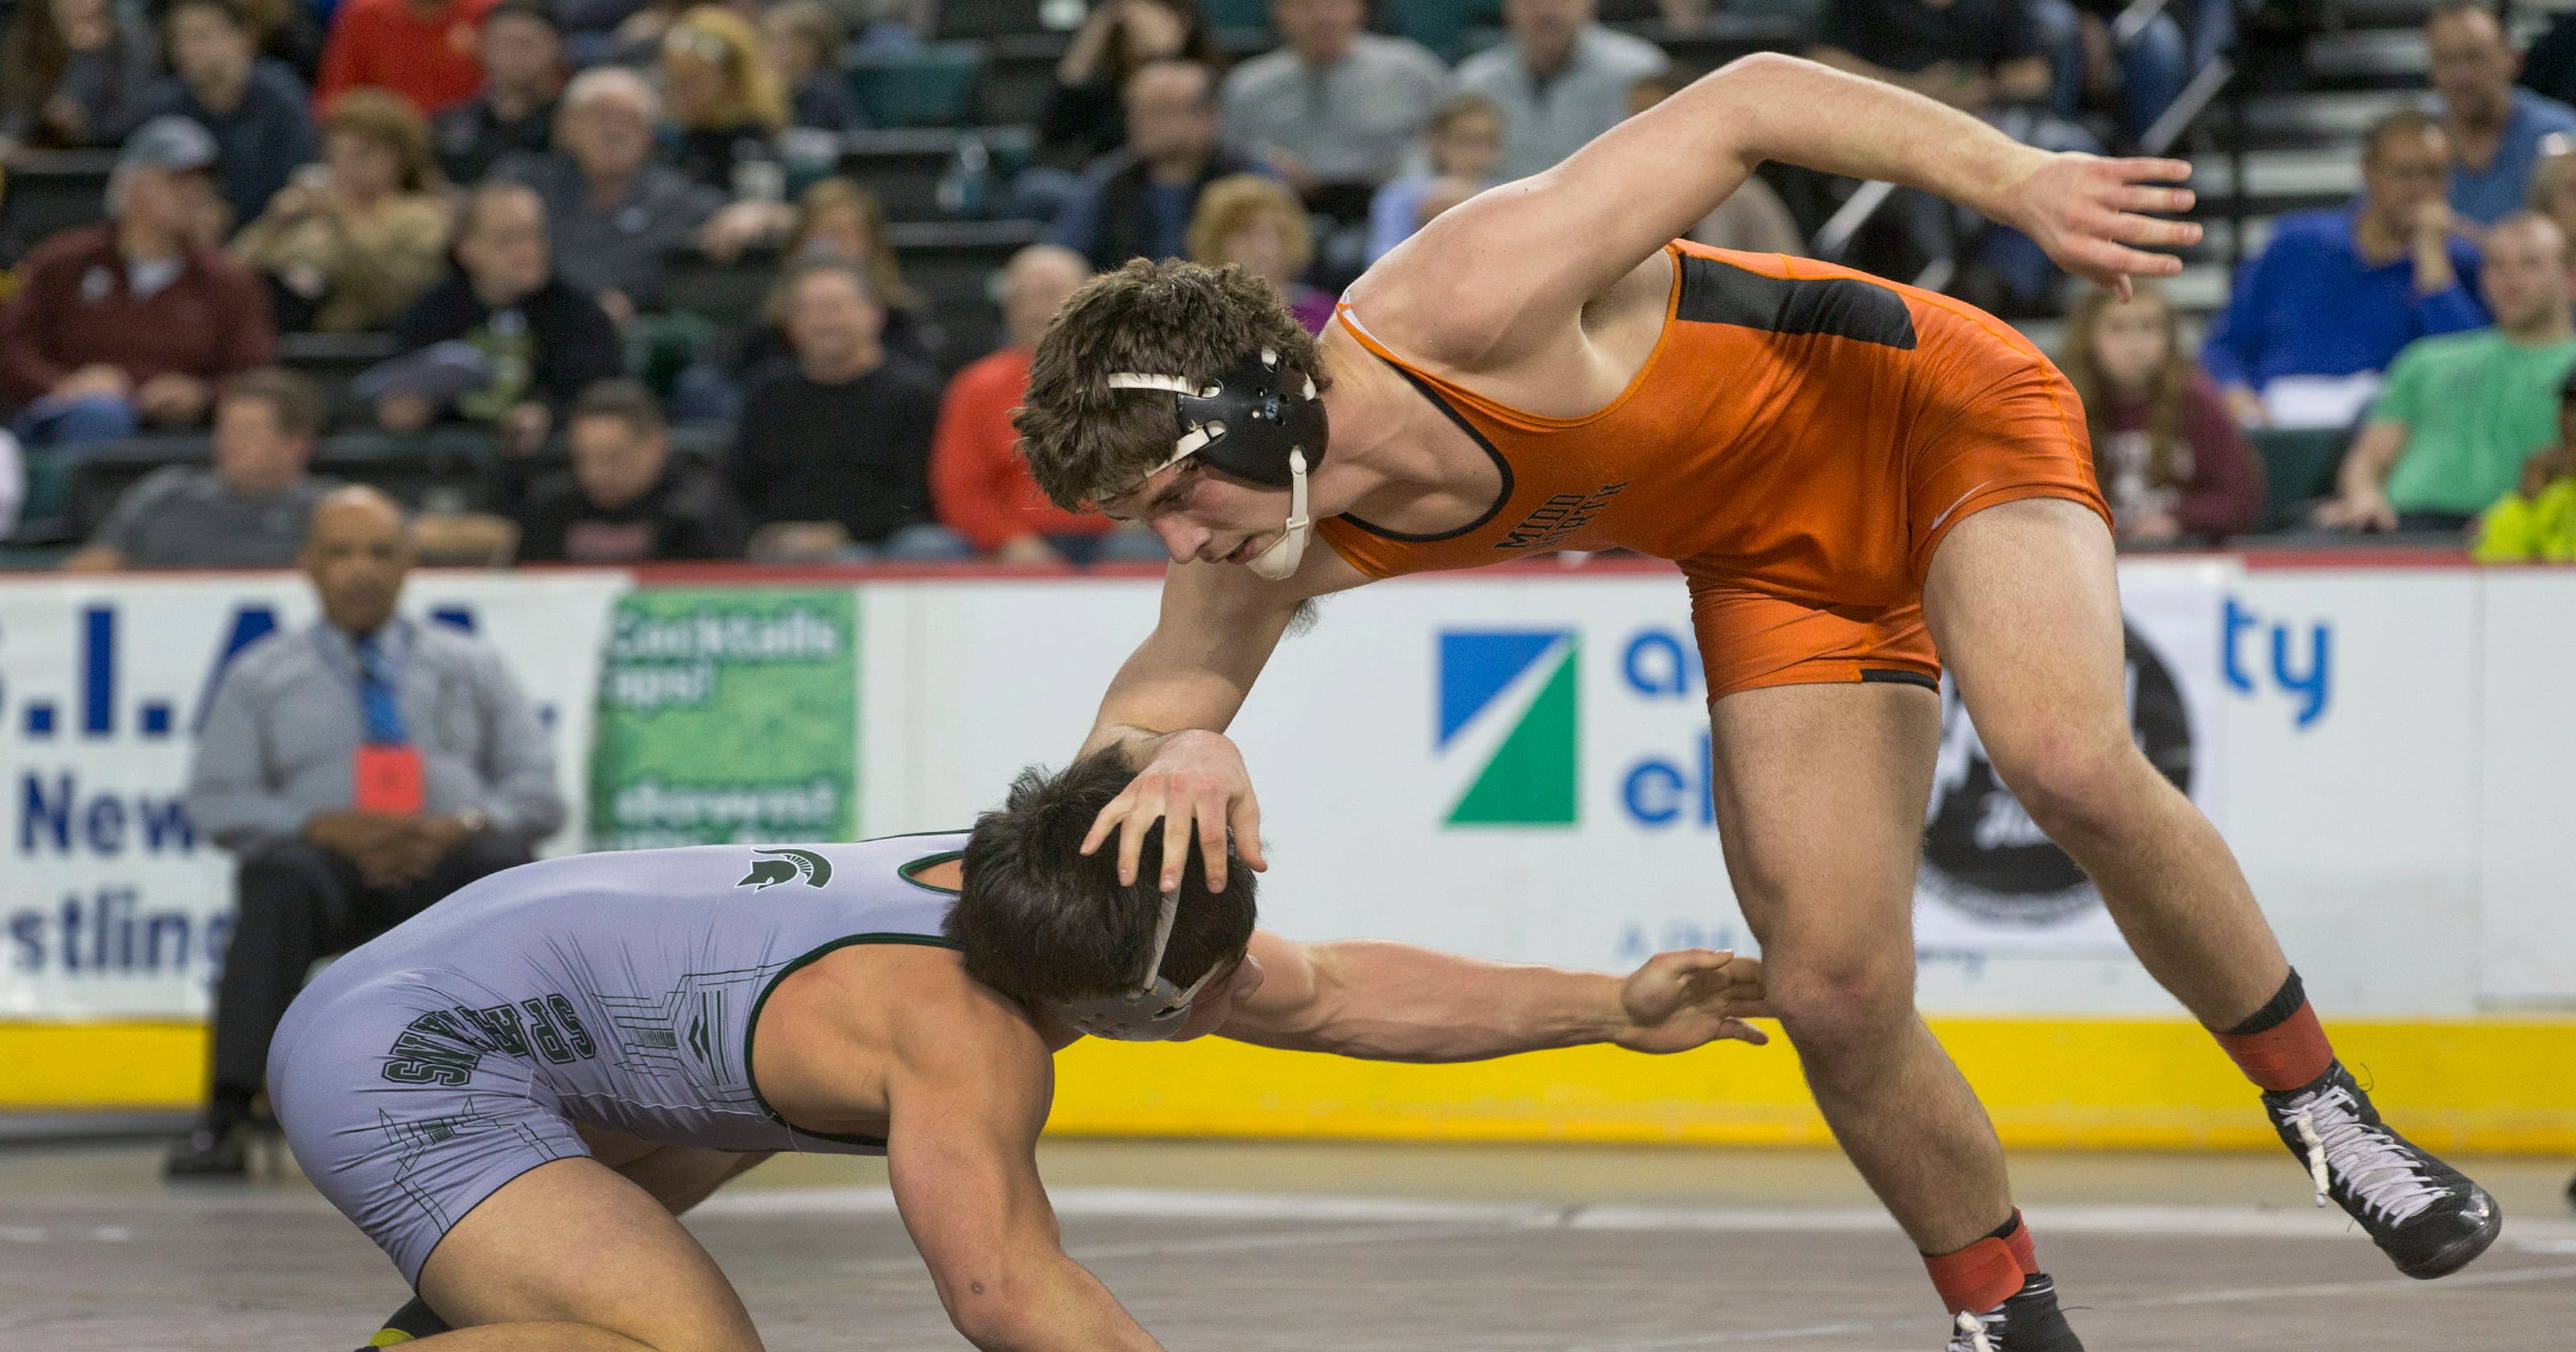 Complete NJSIAA wrestling tournament results